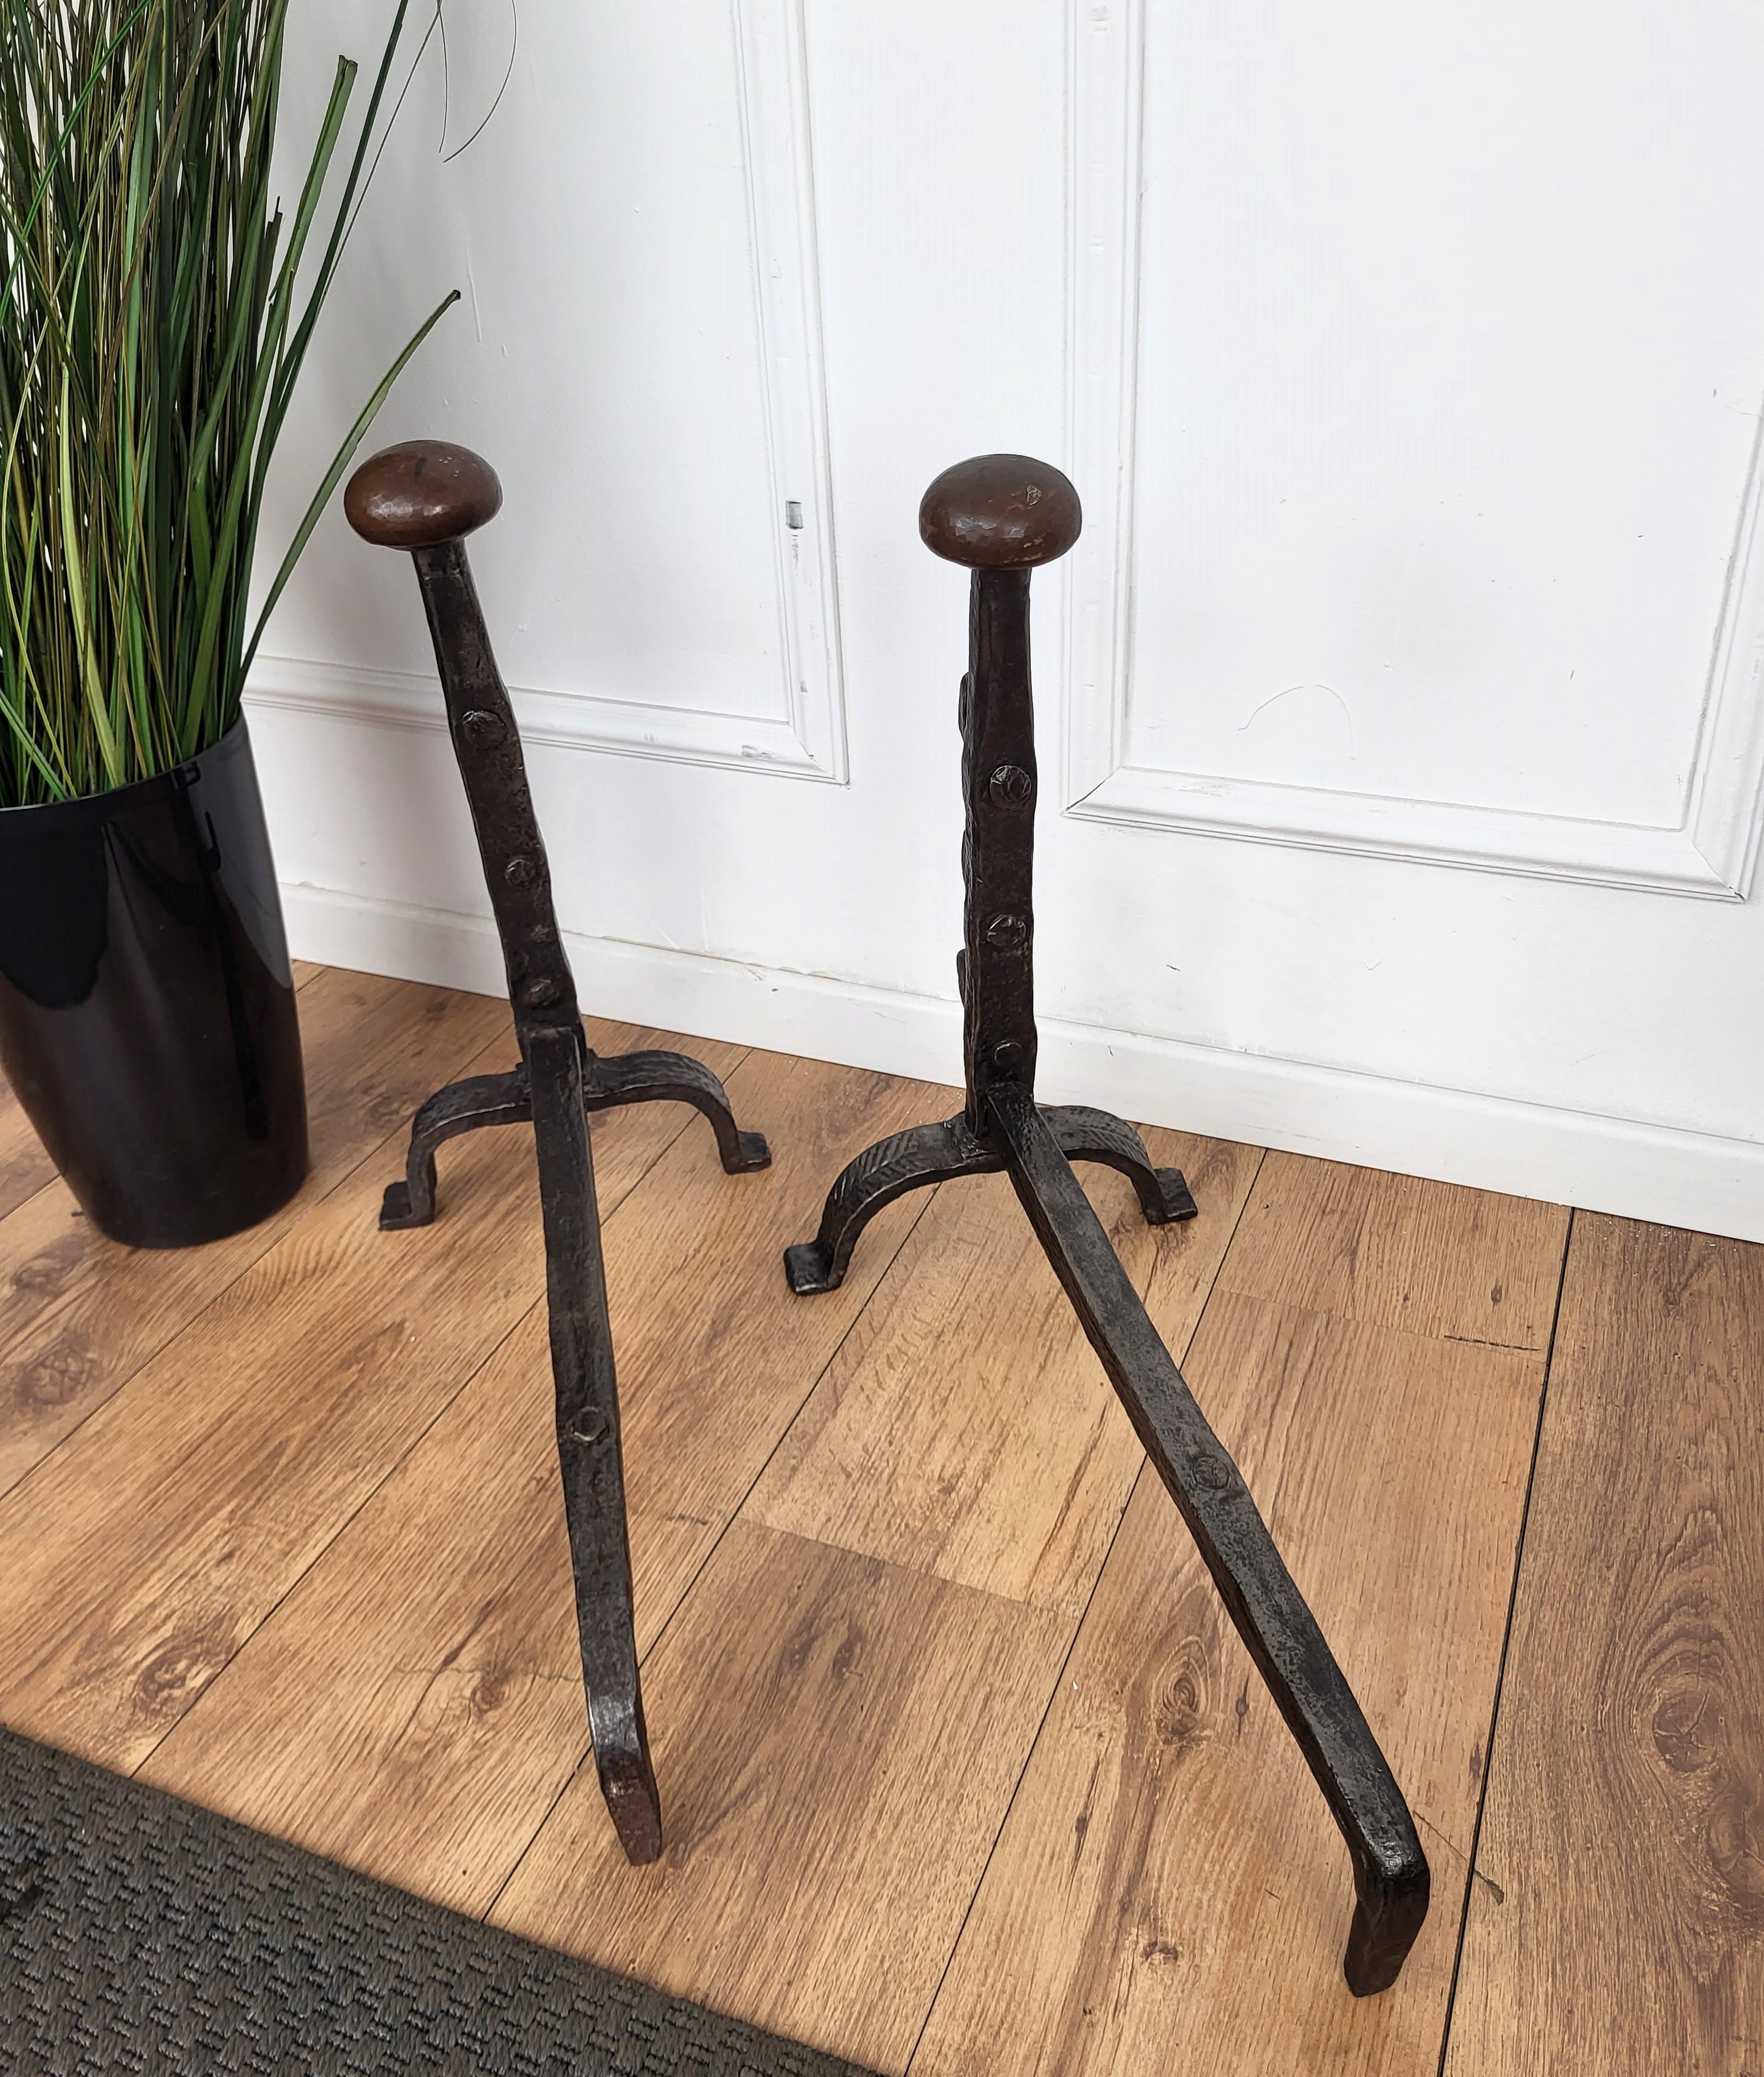 Pair of Antique Italian Wrought Iron Andirons Fireplace Log Holder For Sale 2